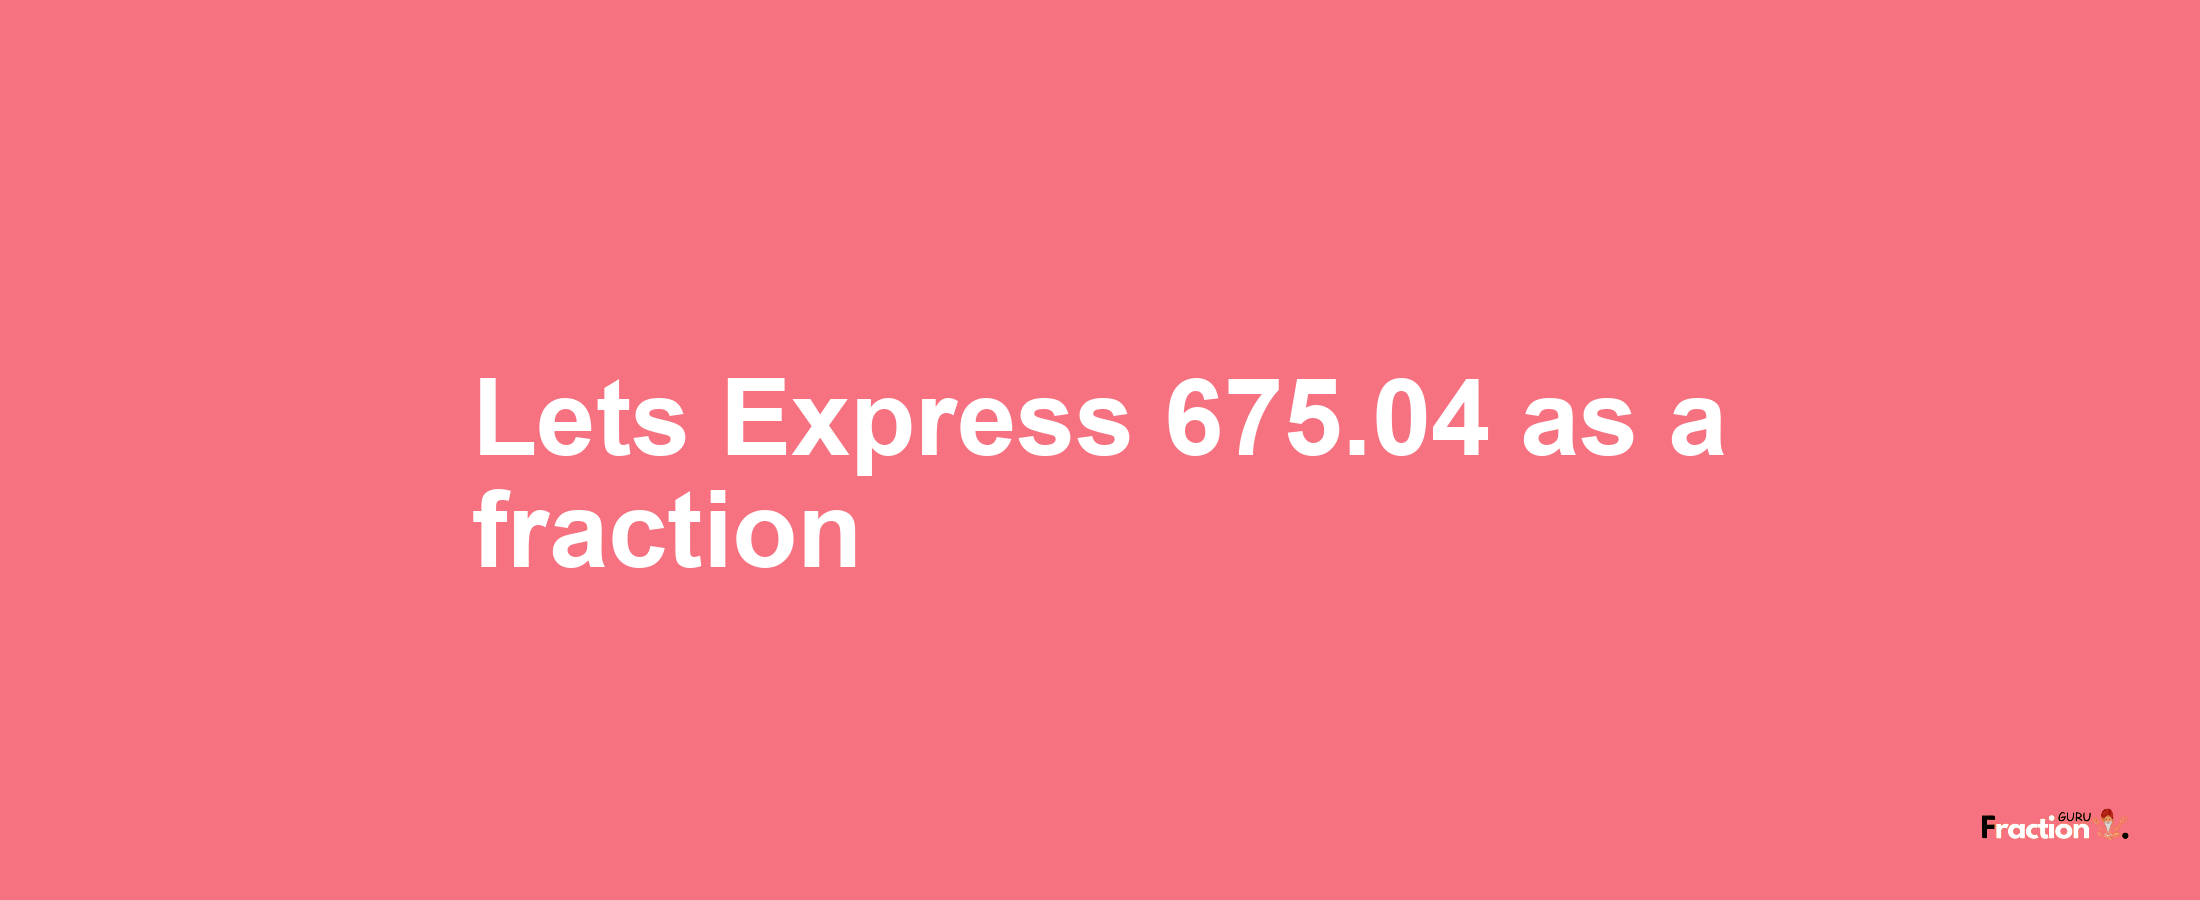 Lets Express 675.04 as afraction